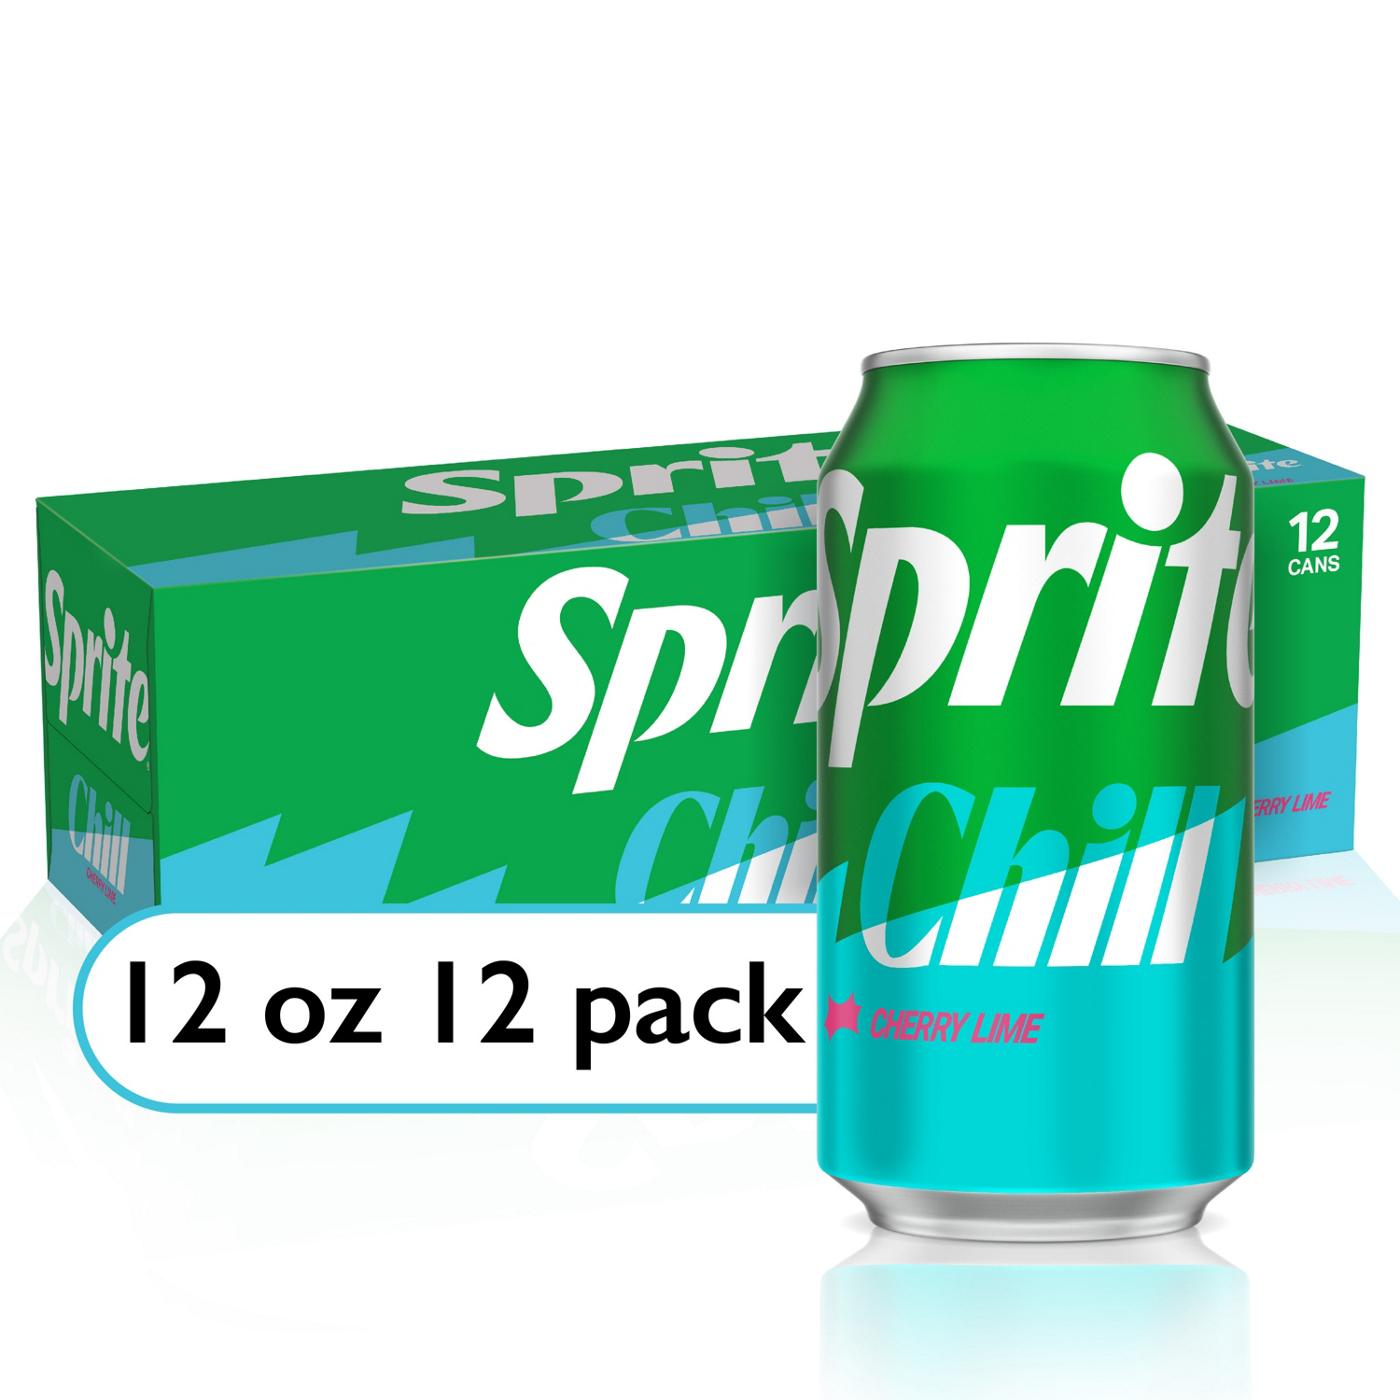 Sprite Chill Cherry Lime, 12 pk Cans; image 4 of 7